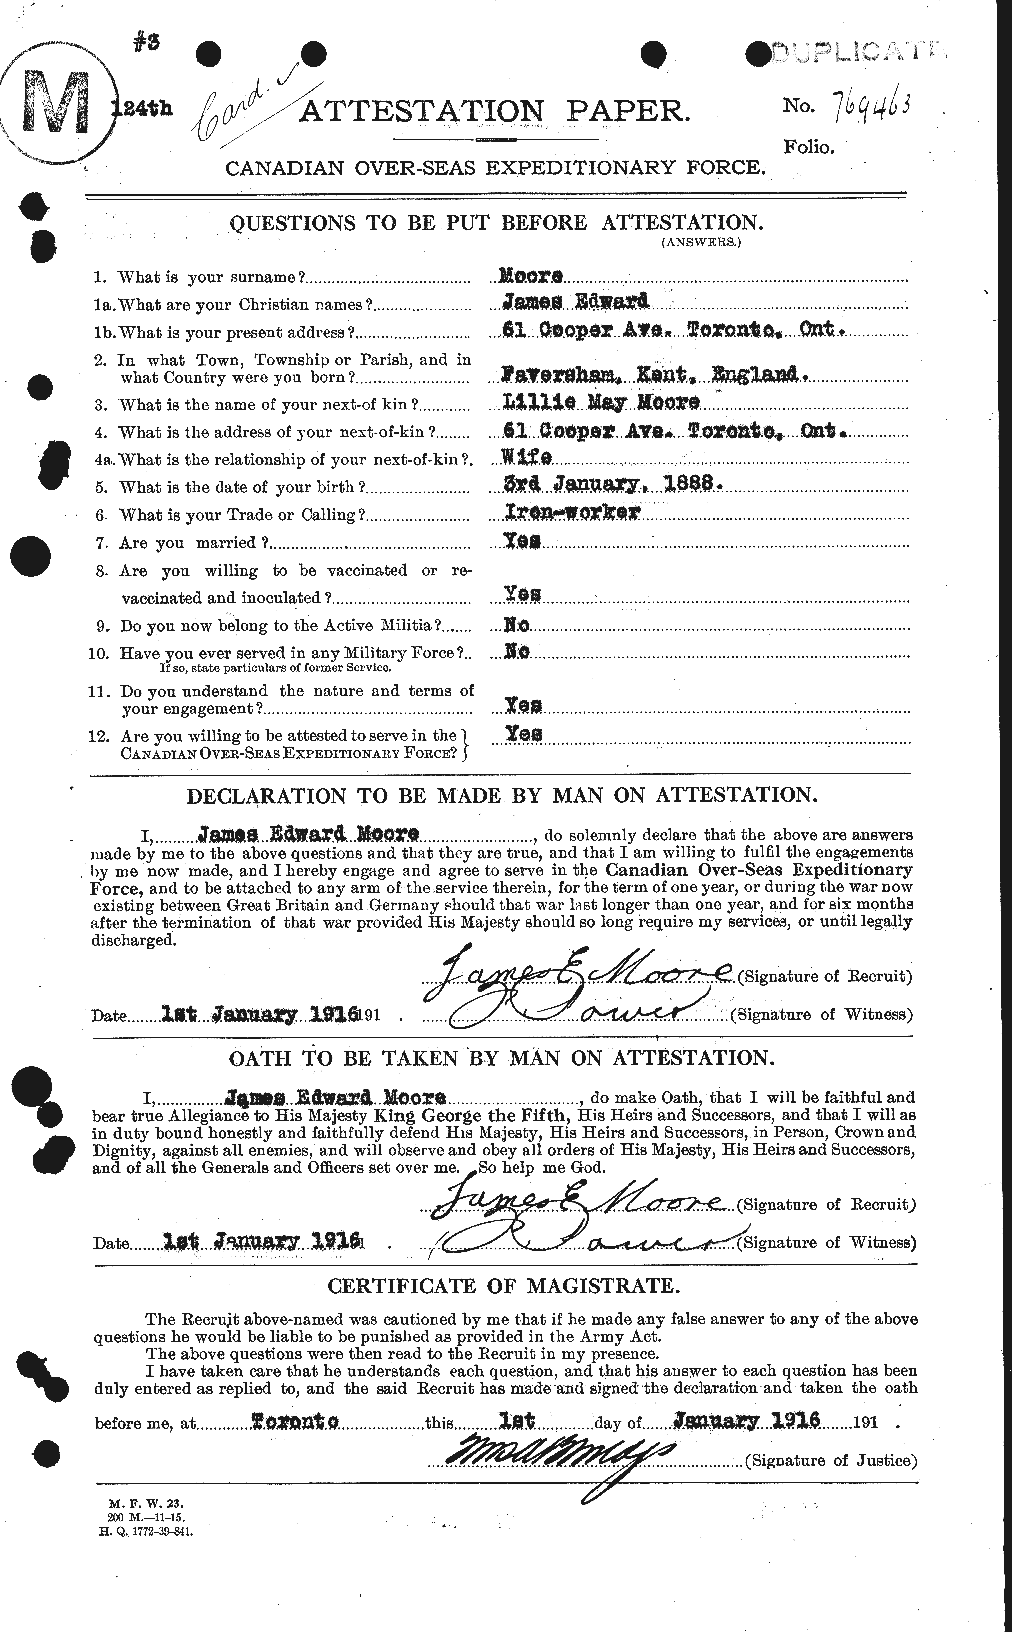 Personnel Records of the First World War - CEF 502216a